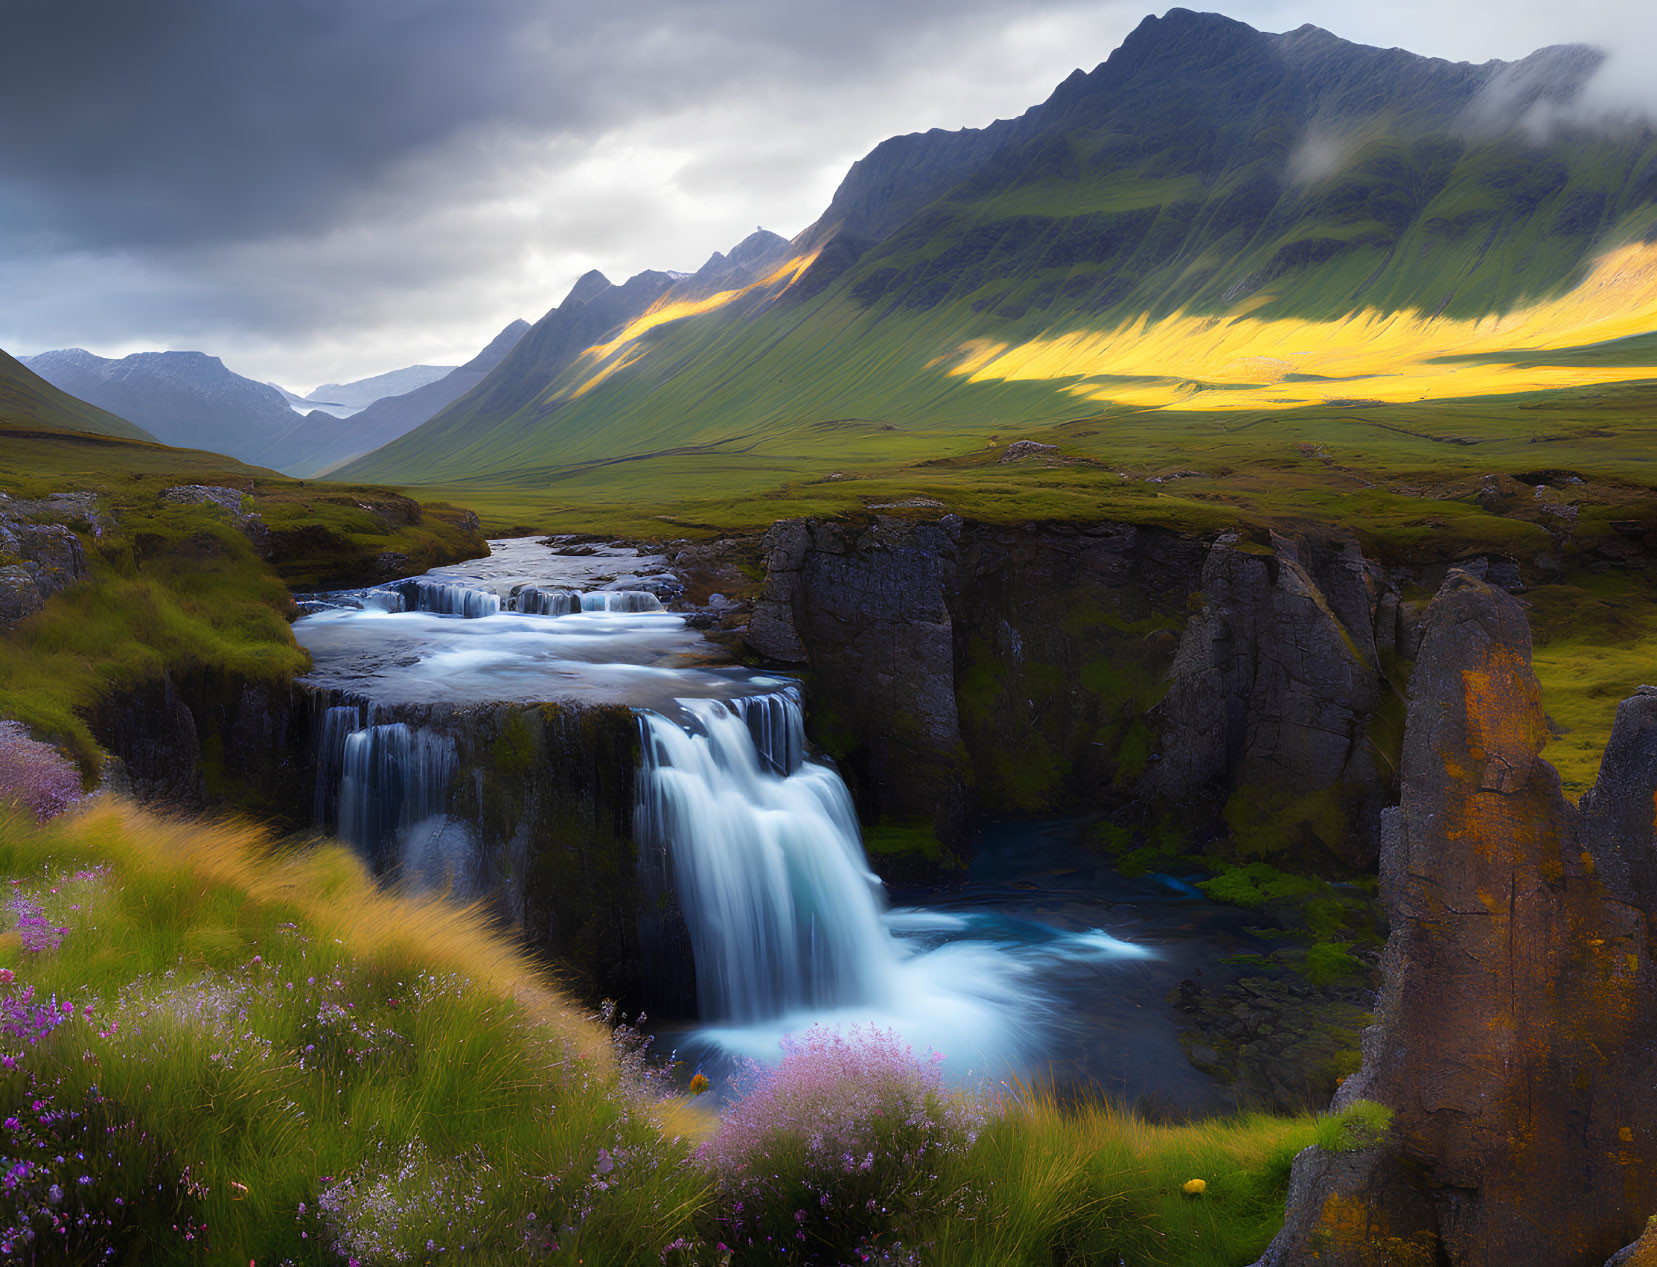 Scenic waterfall in lush landscape with wildflowers and mountains